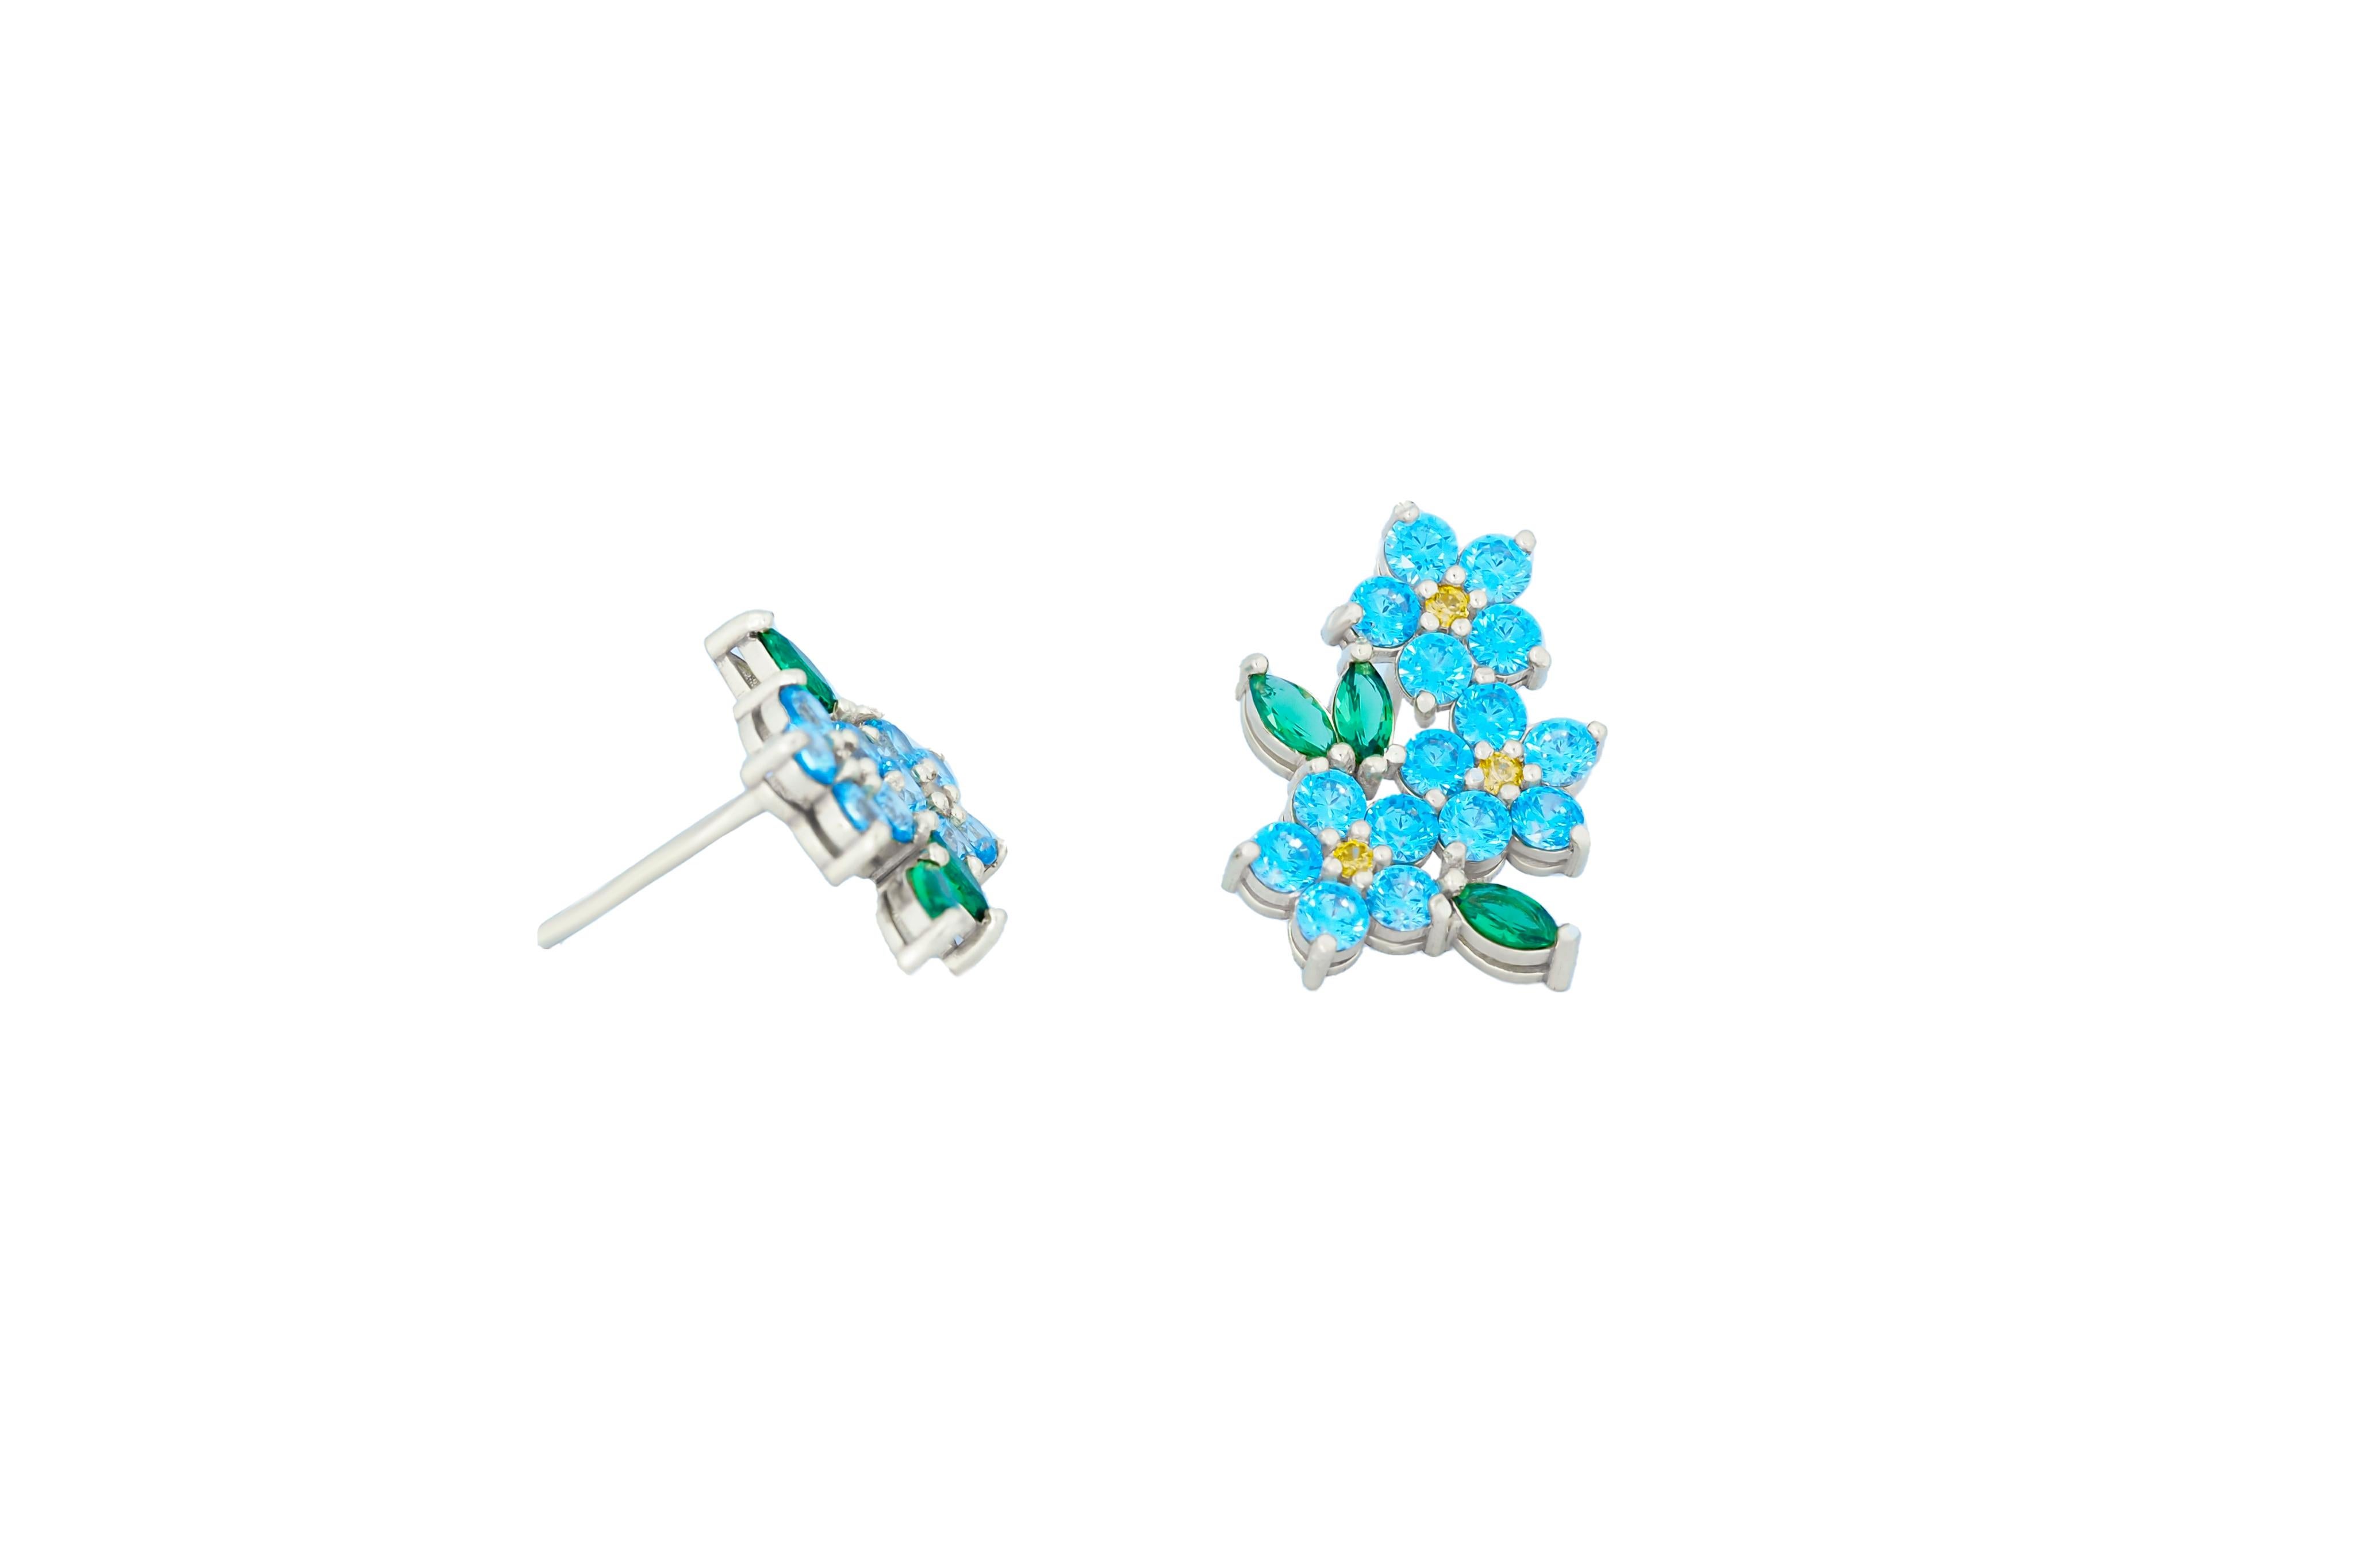 Round Cut Mismatched flower earrings with colored gemstones in 14k gold. For Sale